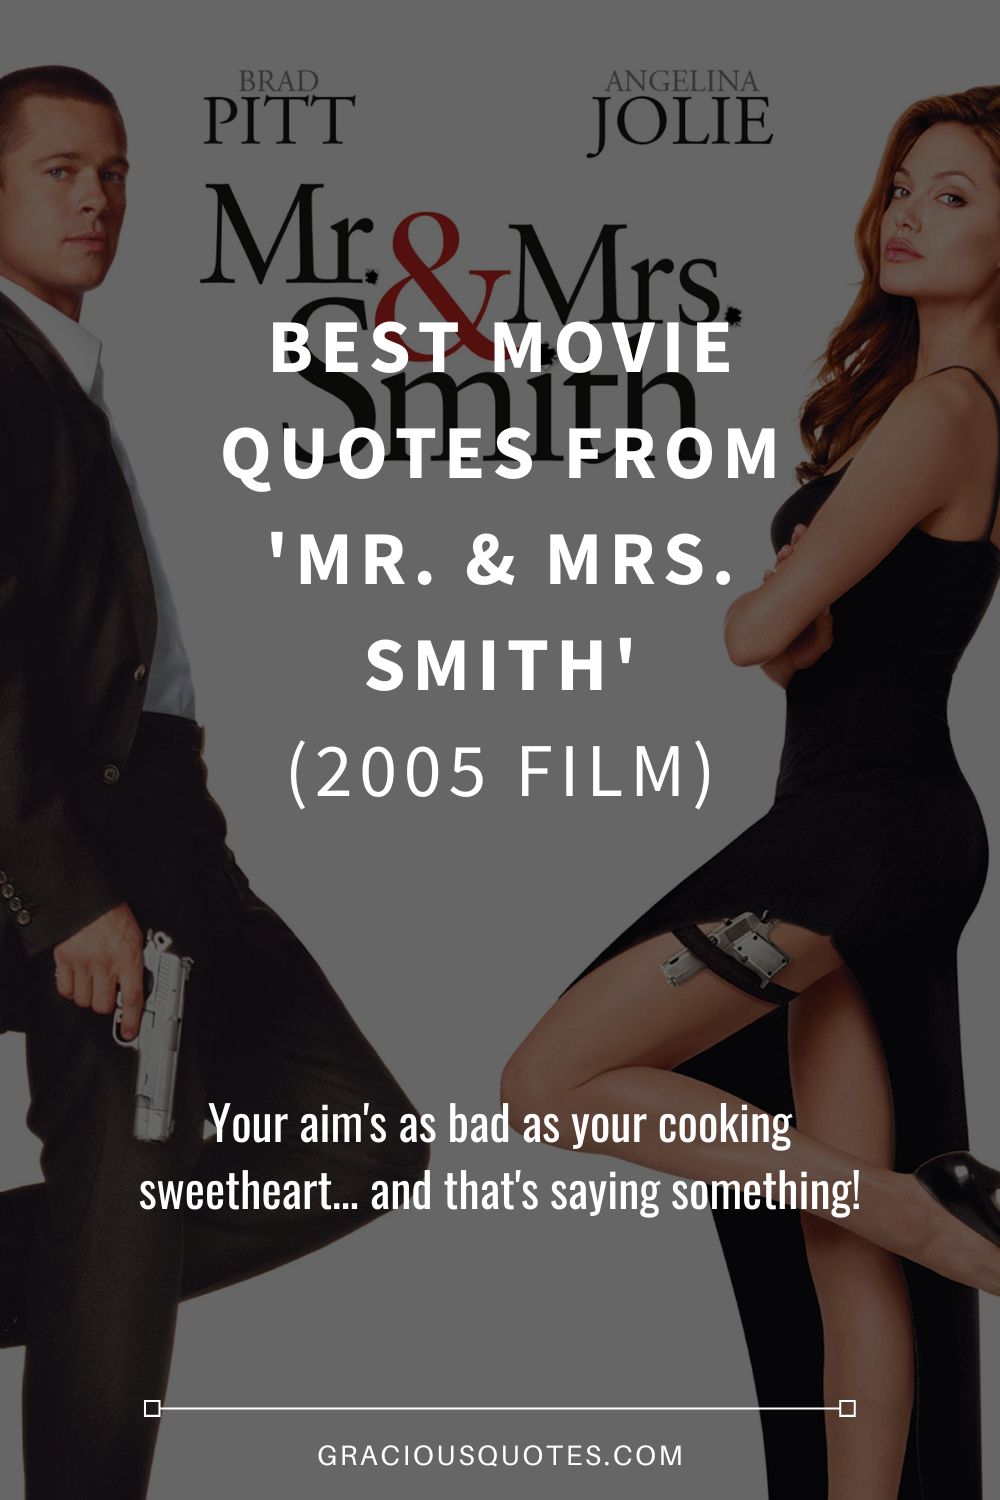 Best Movie Quotes from 'Mr. & Mrs. Smith' (2005 FILM) - Gracious Quotes